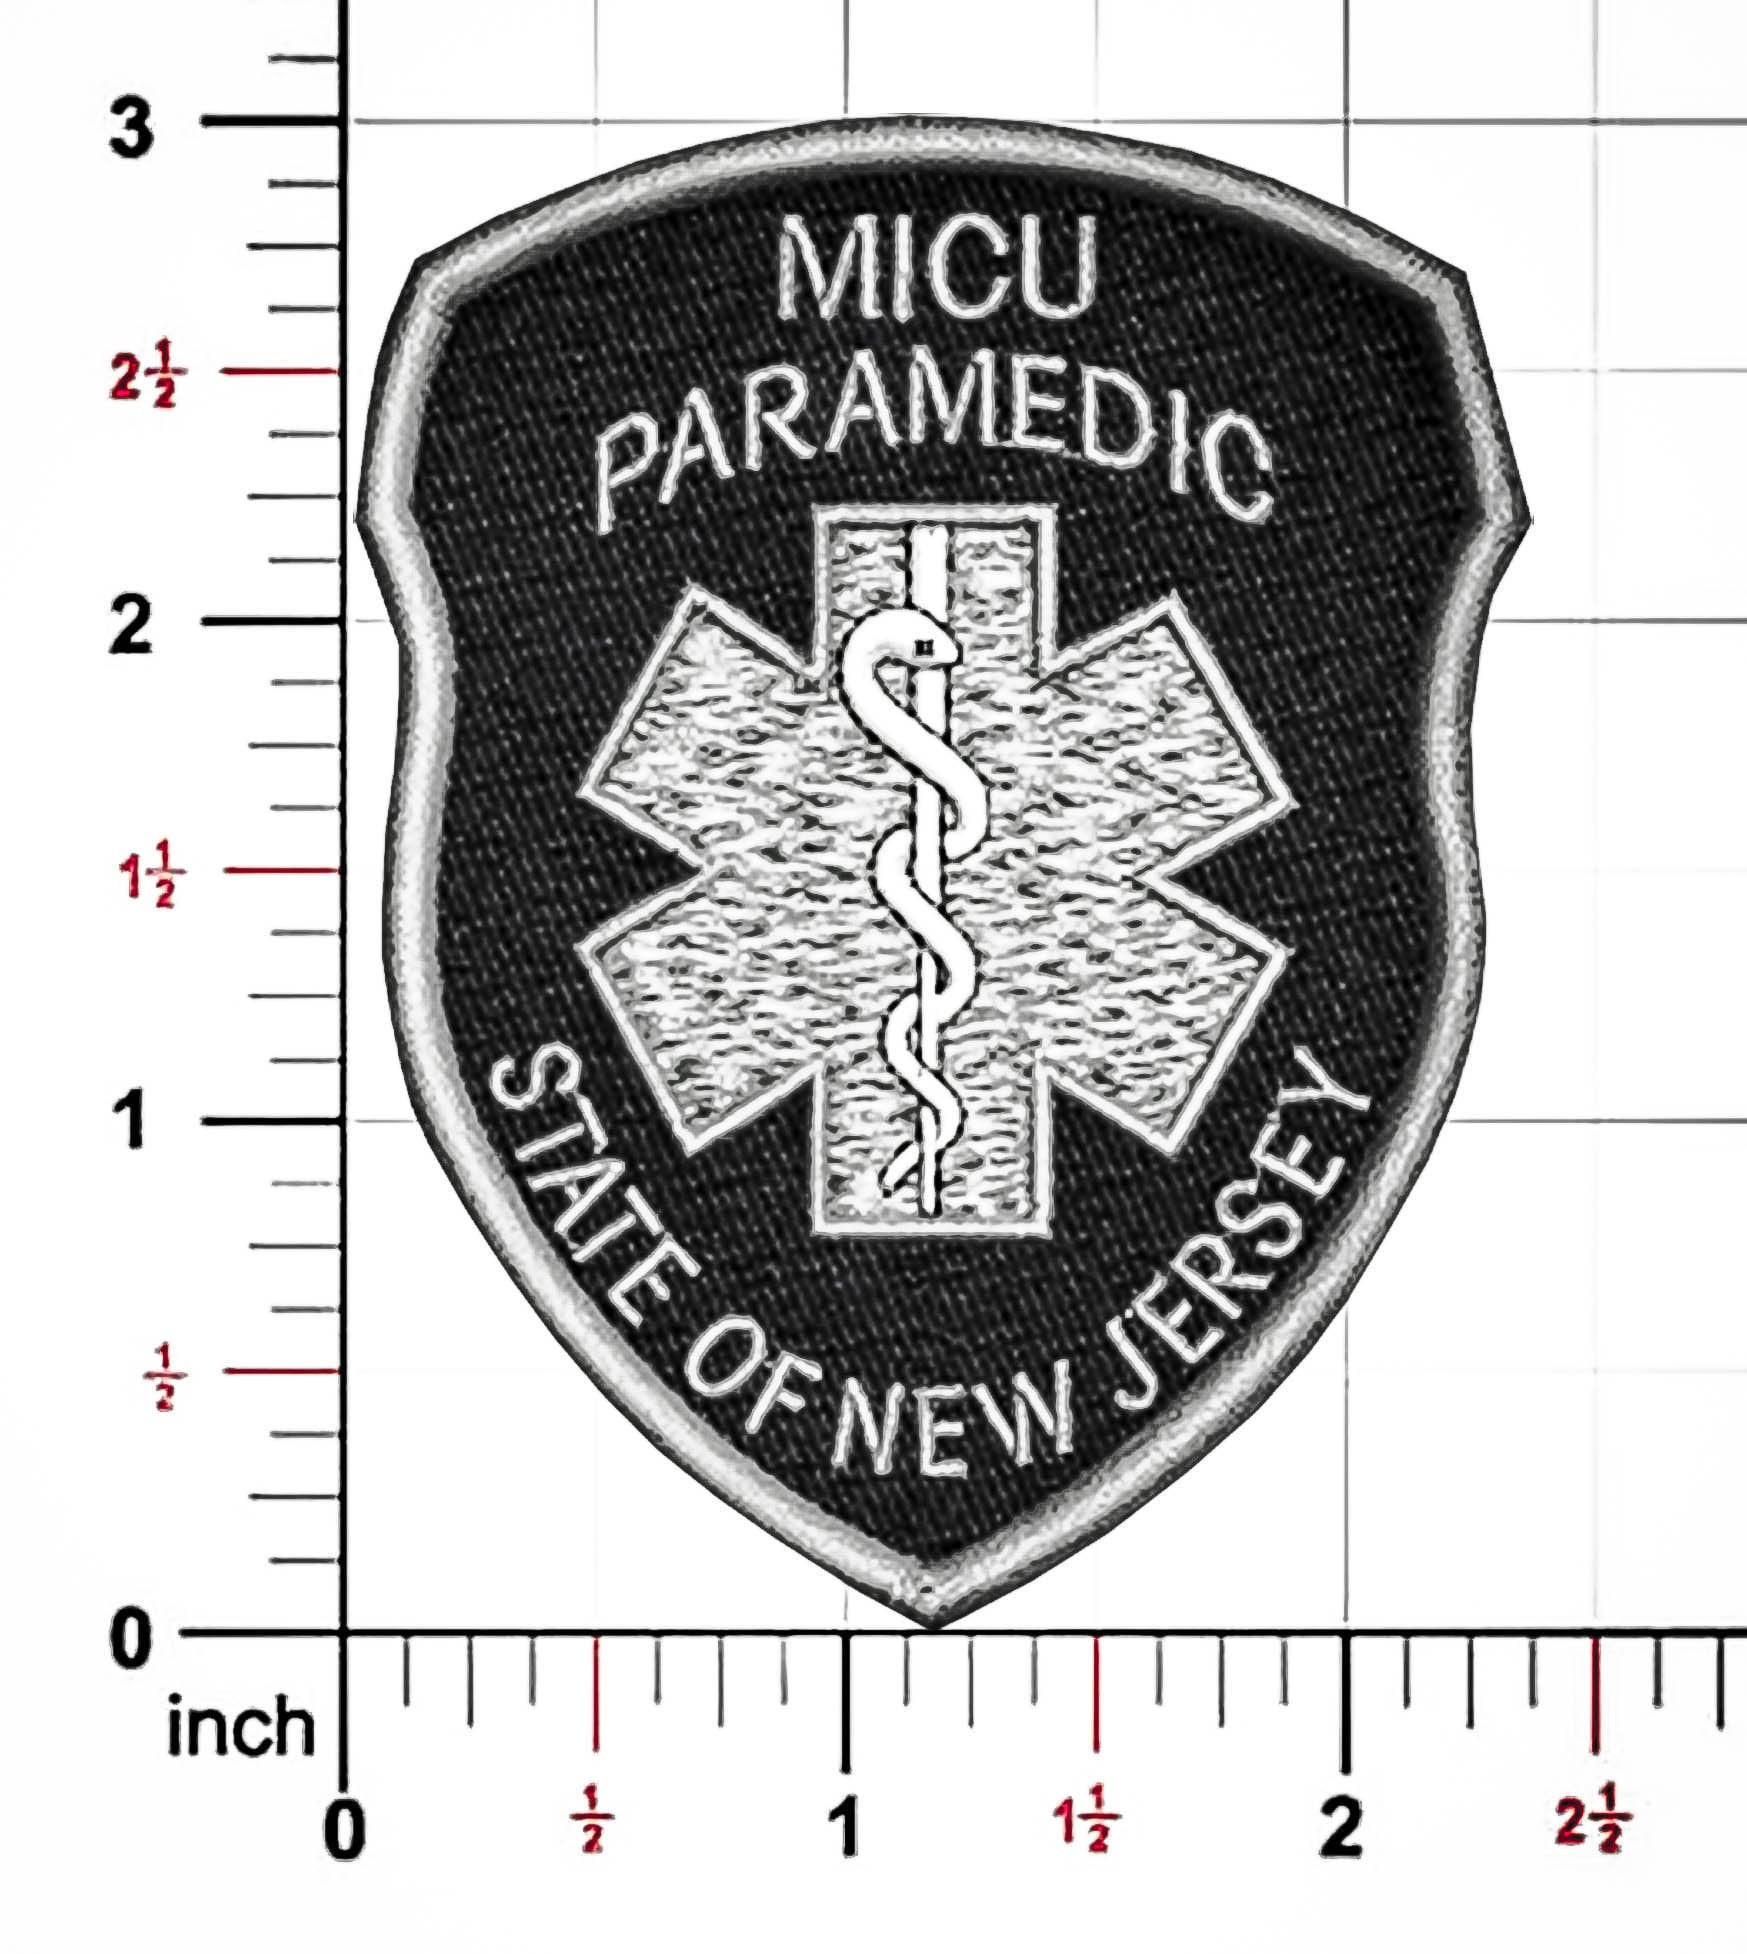 Buy Medical Patch, EMT Patch PVC Rubber 1.5 x 1.5 Inch Velcro Hook Backing  Black/Red Bartact PVCMEDBR Bartact at JeepHut Off-Road